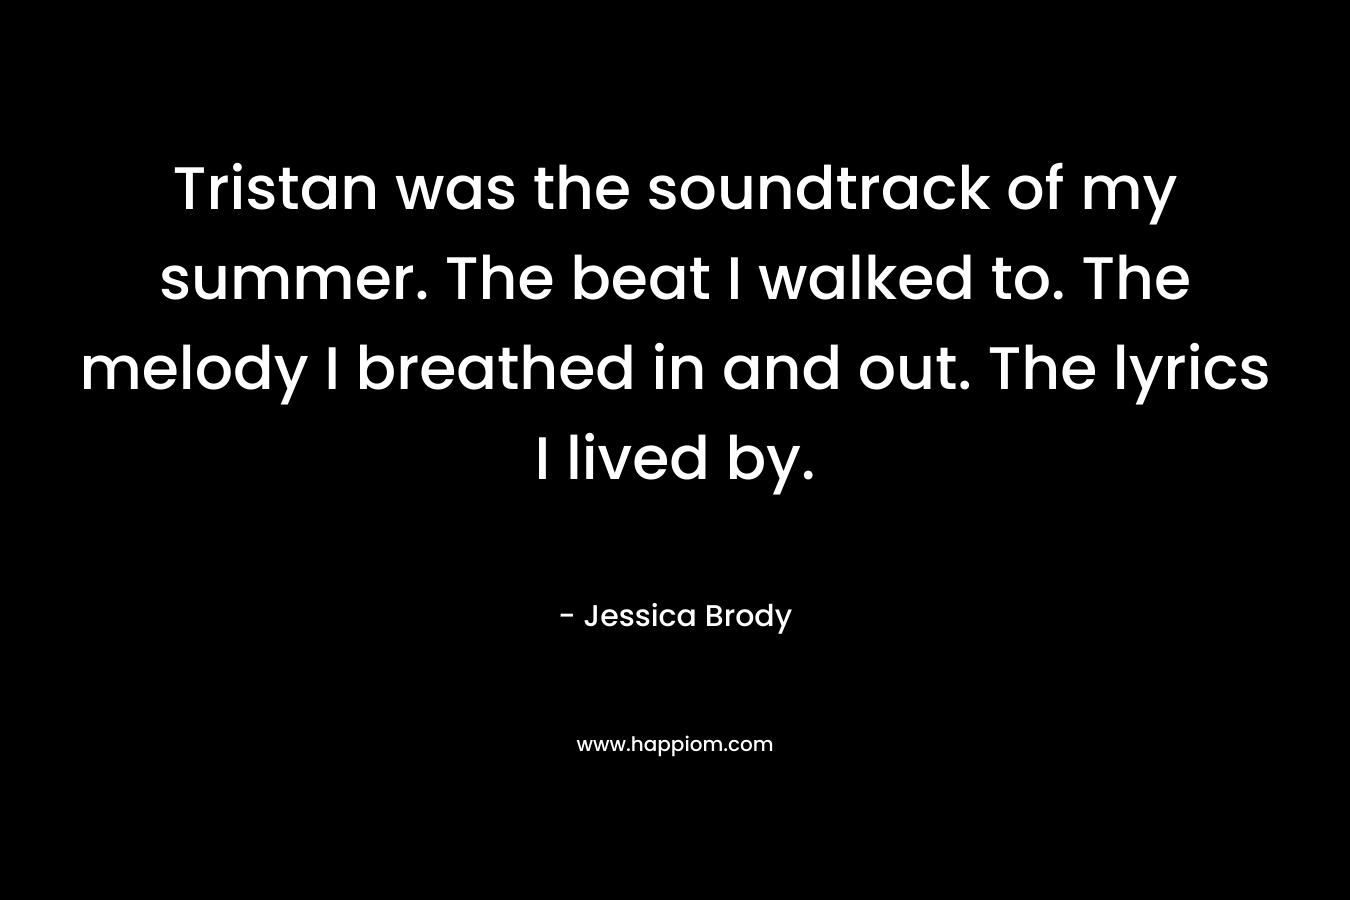 Tristan was the soundtrack of my summer. The beat I walked to. The melody I breathed in and out. The lyrics I lived by. – Jessica Brody